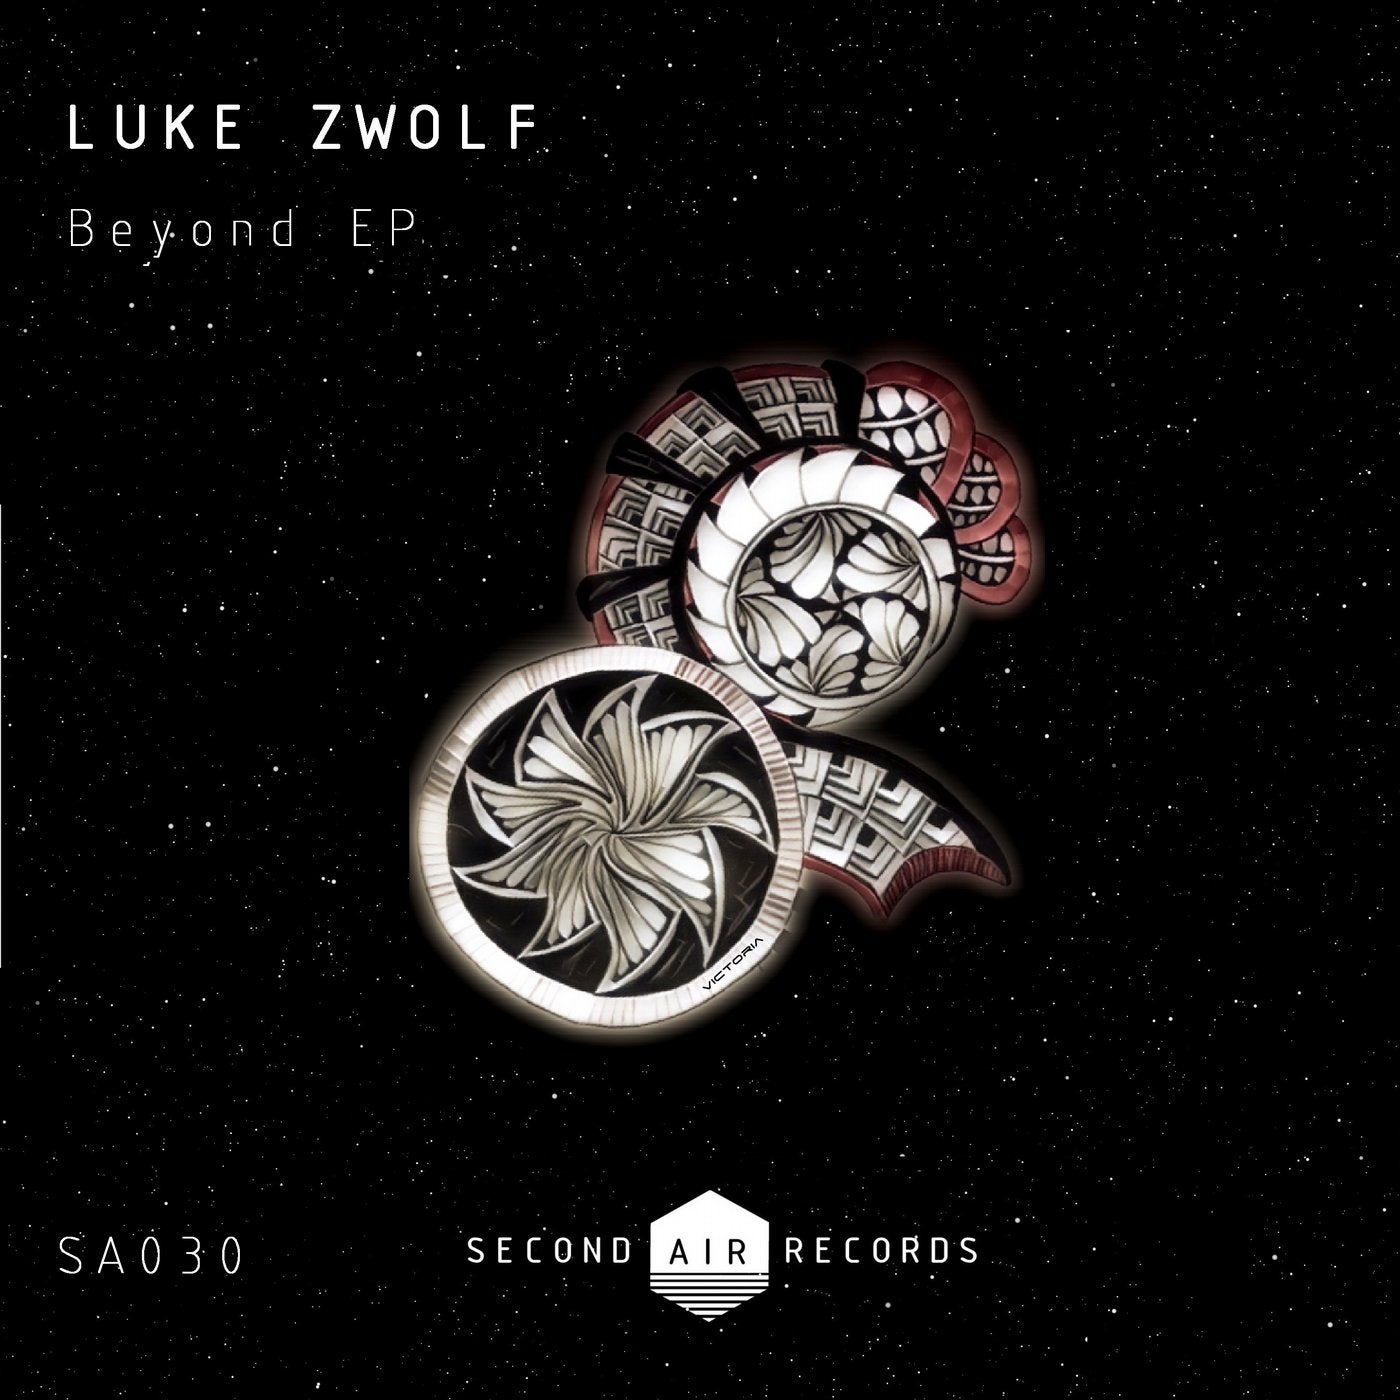 Seconds mixed. Zwolf. Air records.